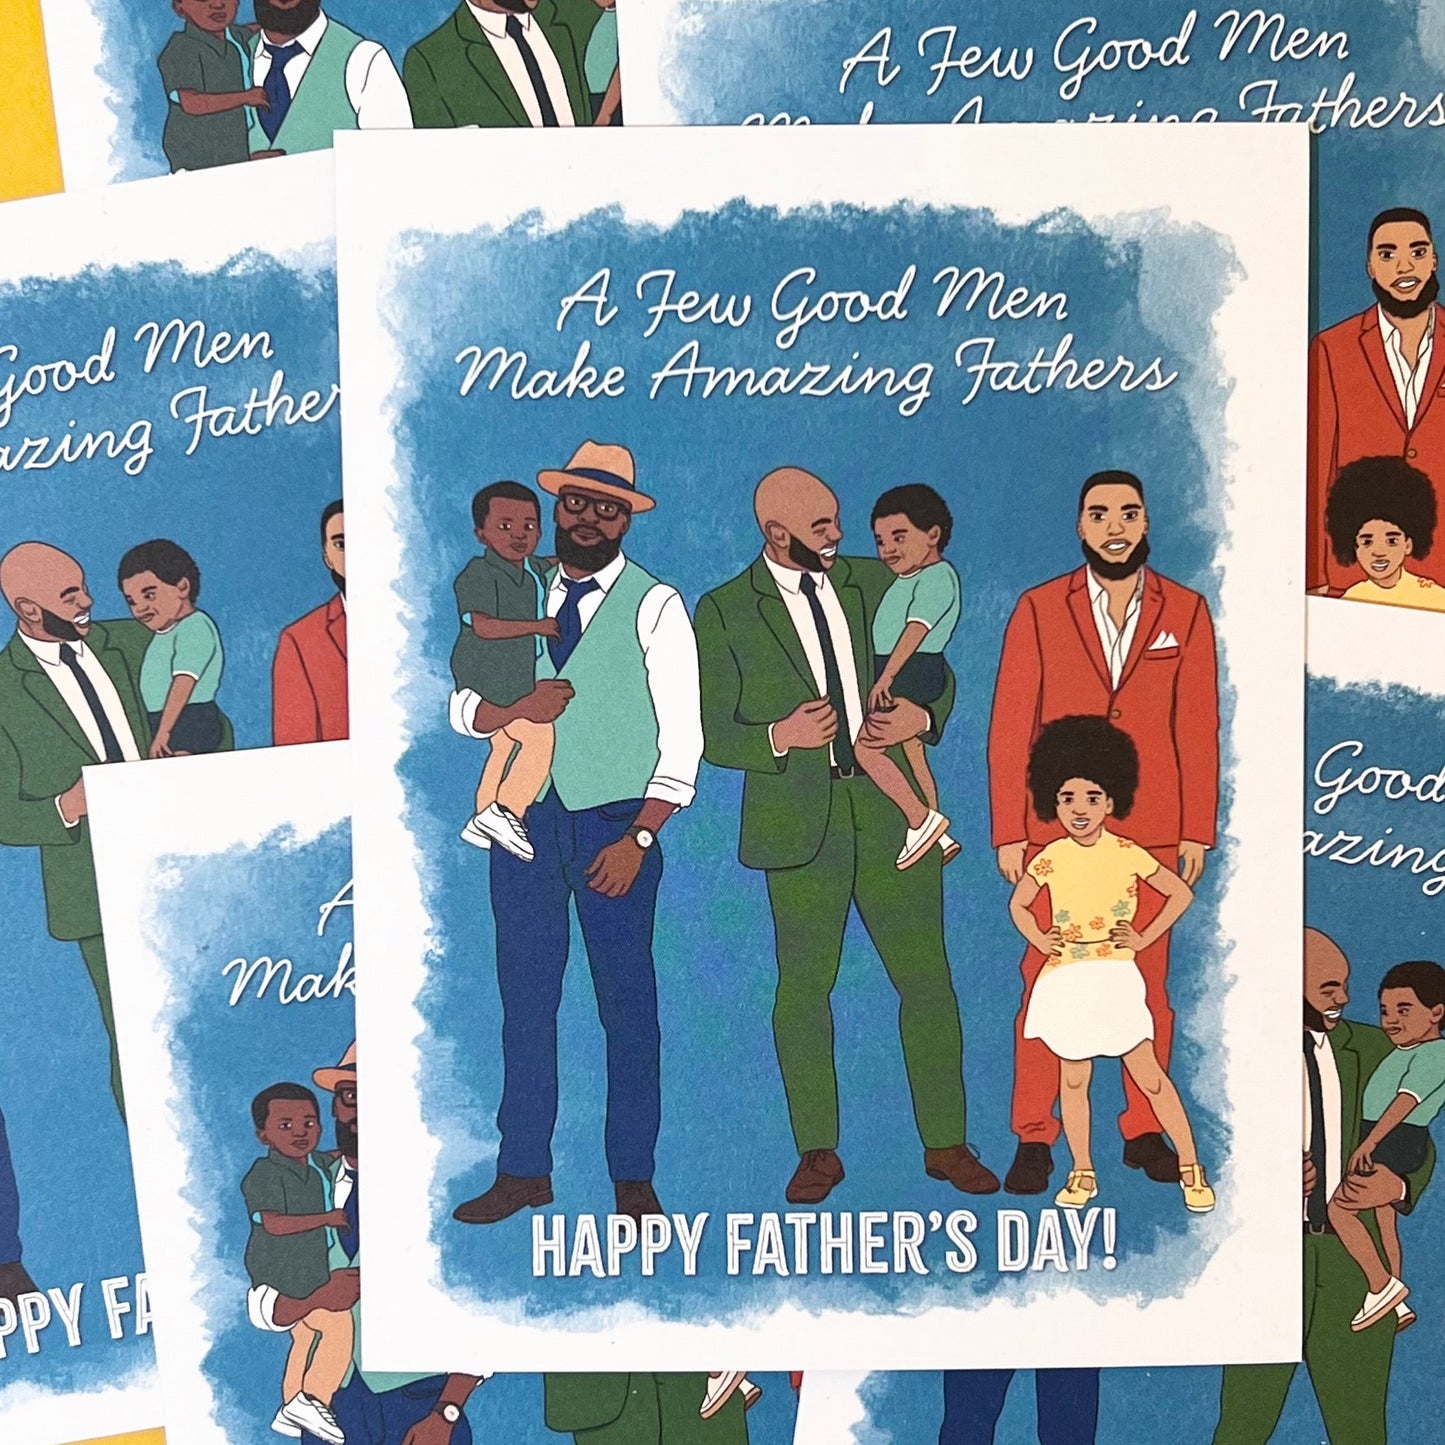 4.25 x 5.5” A2 size greeting card illustration of three African American Fathers standing with their kids. Two dads are holding their kid in their arms while another dad stands with his daughter in front of him. Each dad is wearing a suit in blue, green, or terracotta. At the top of the card are the words “A Few Good Men Make Amazing Fathers” with “Happy Father’s Day” at the bottom. The textured watercolor background has shades of blue with a white border.